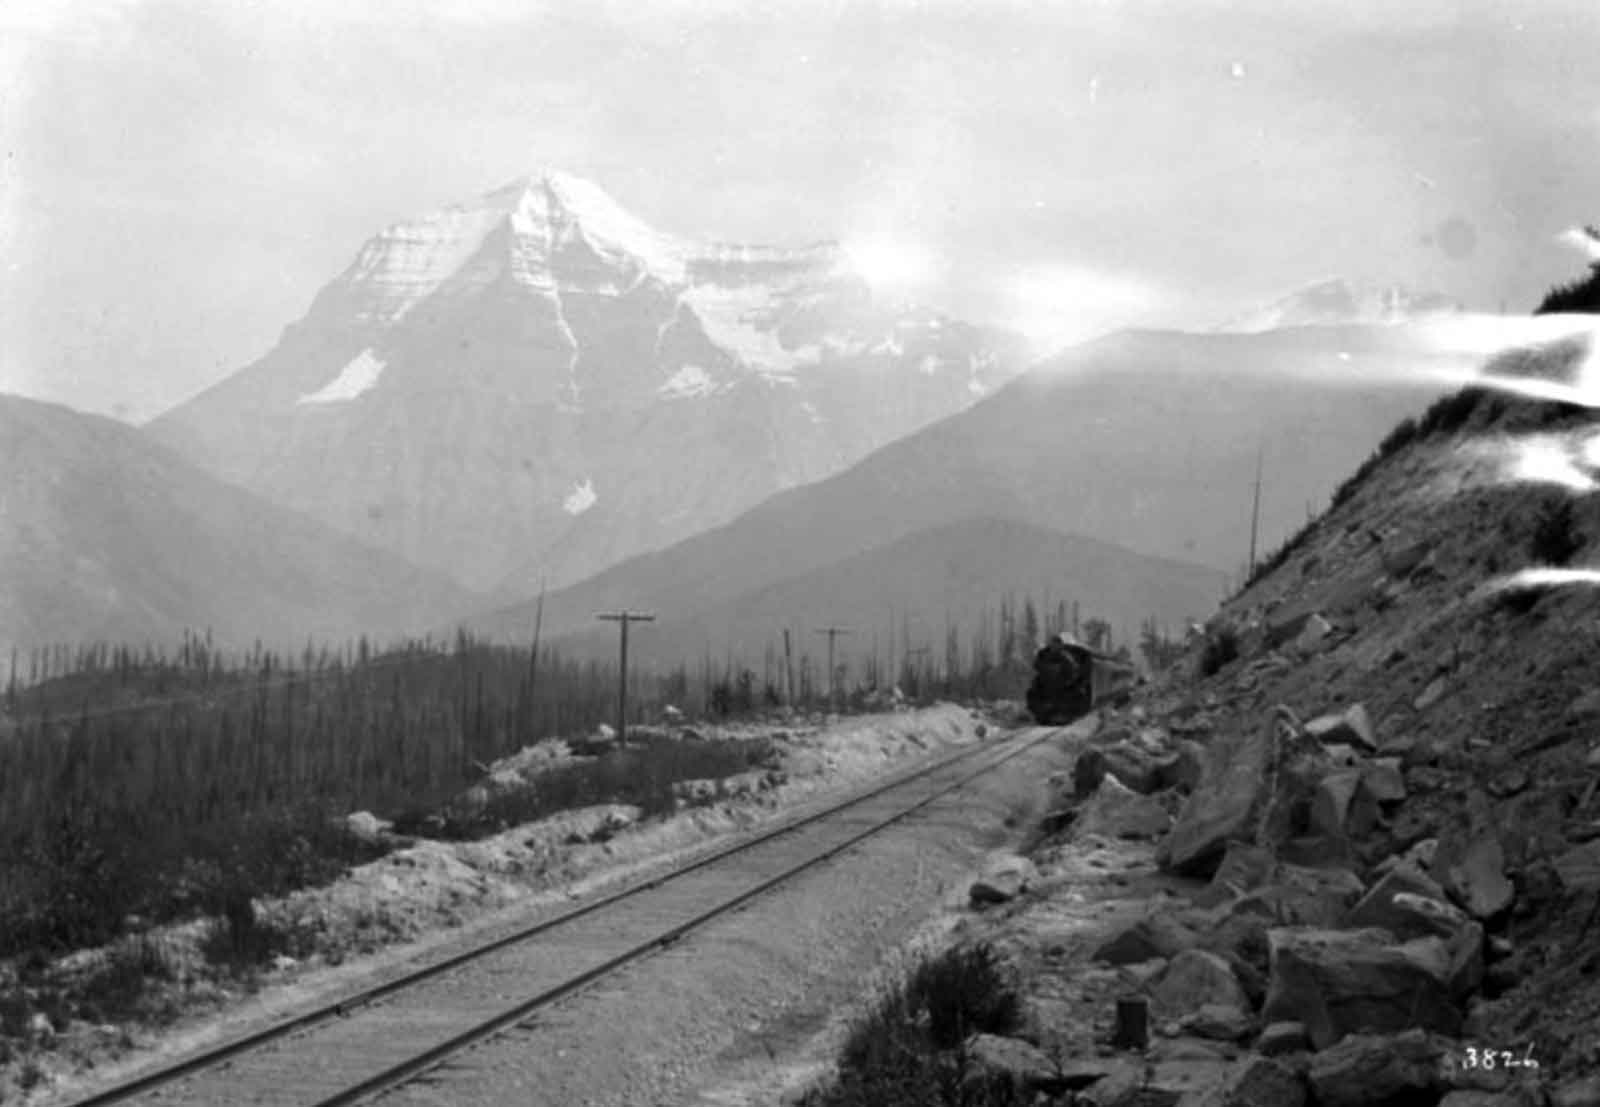 Mount Robson, B.C. from two miles below
William James Topley, 1914